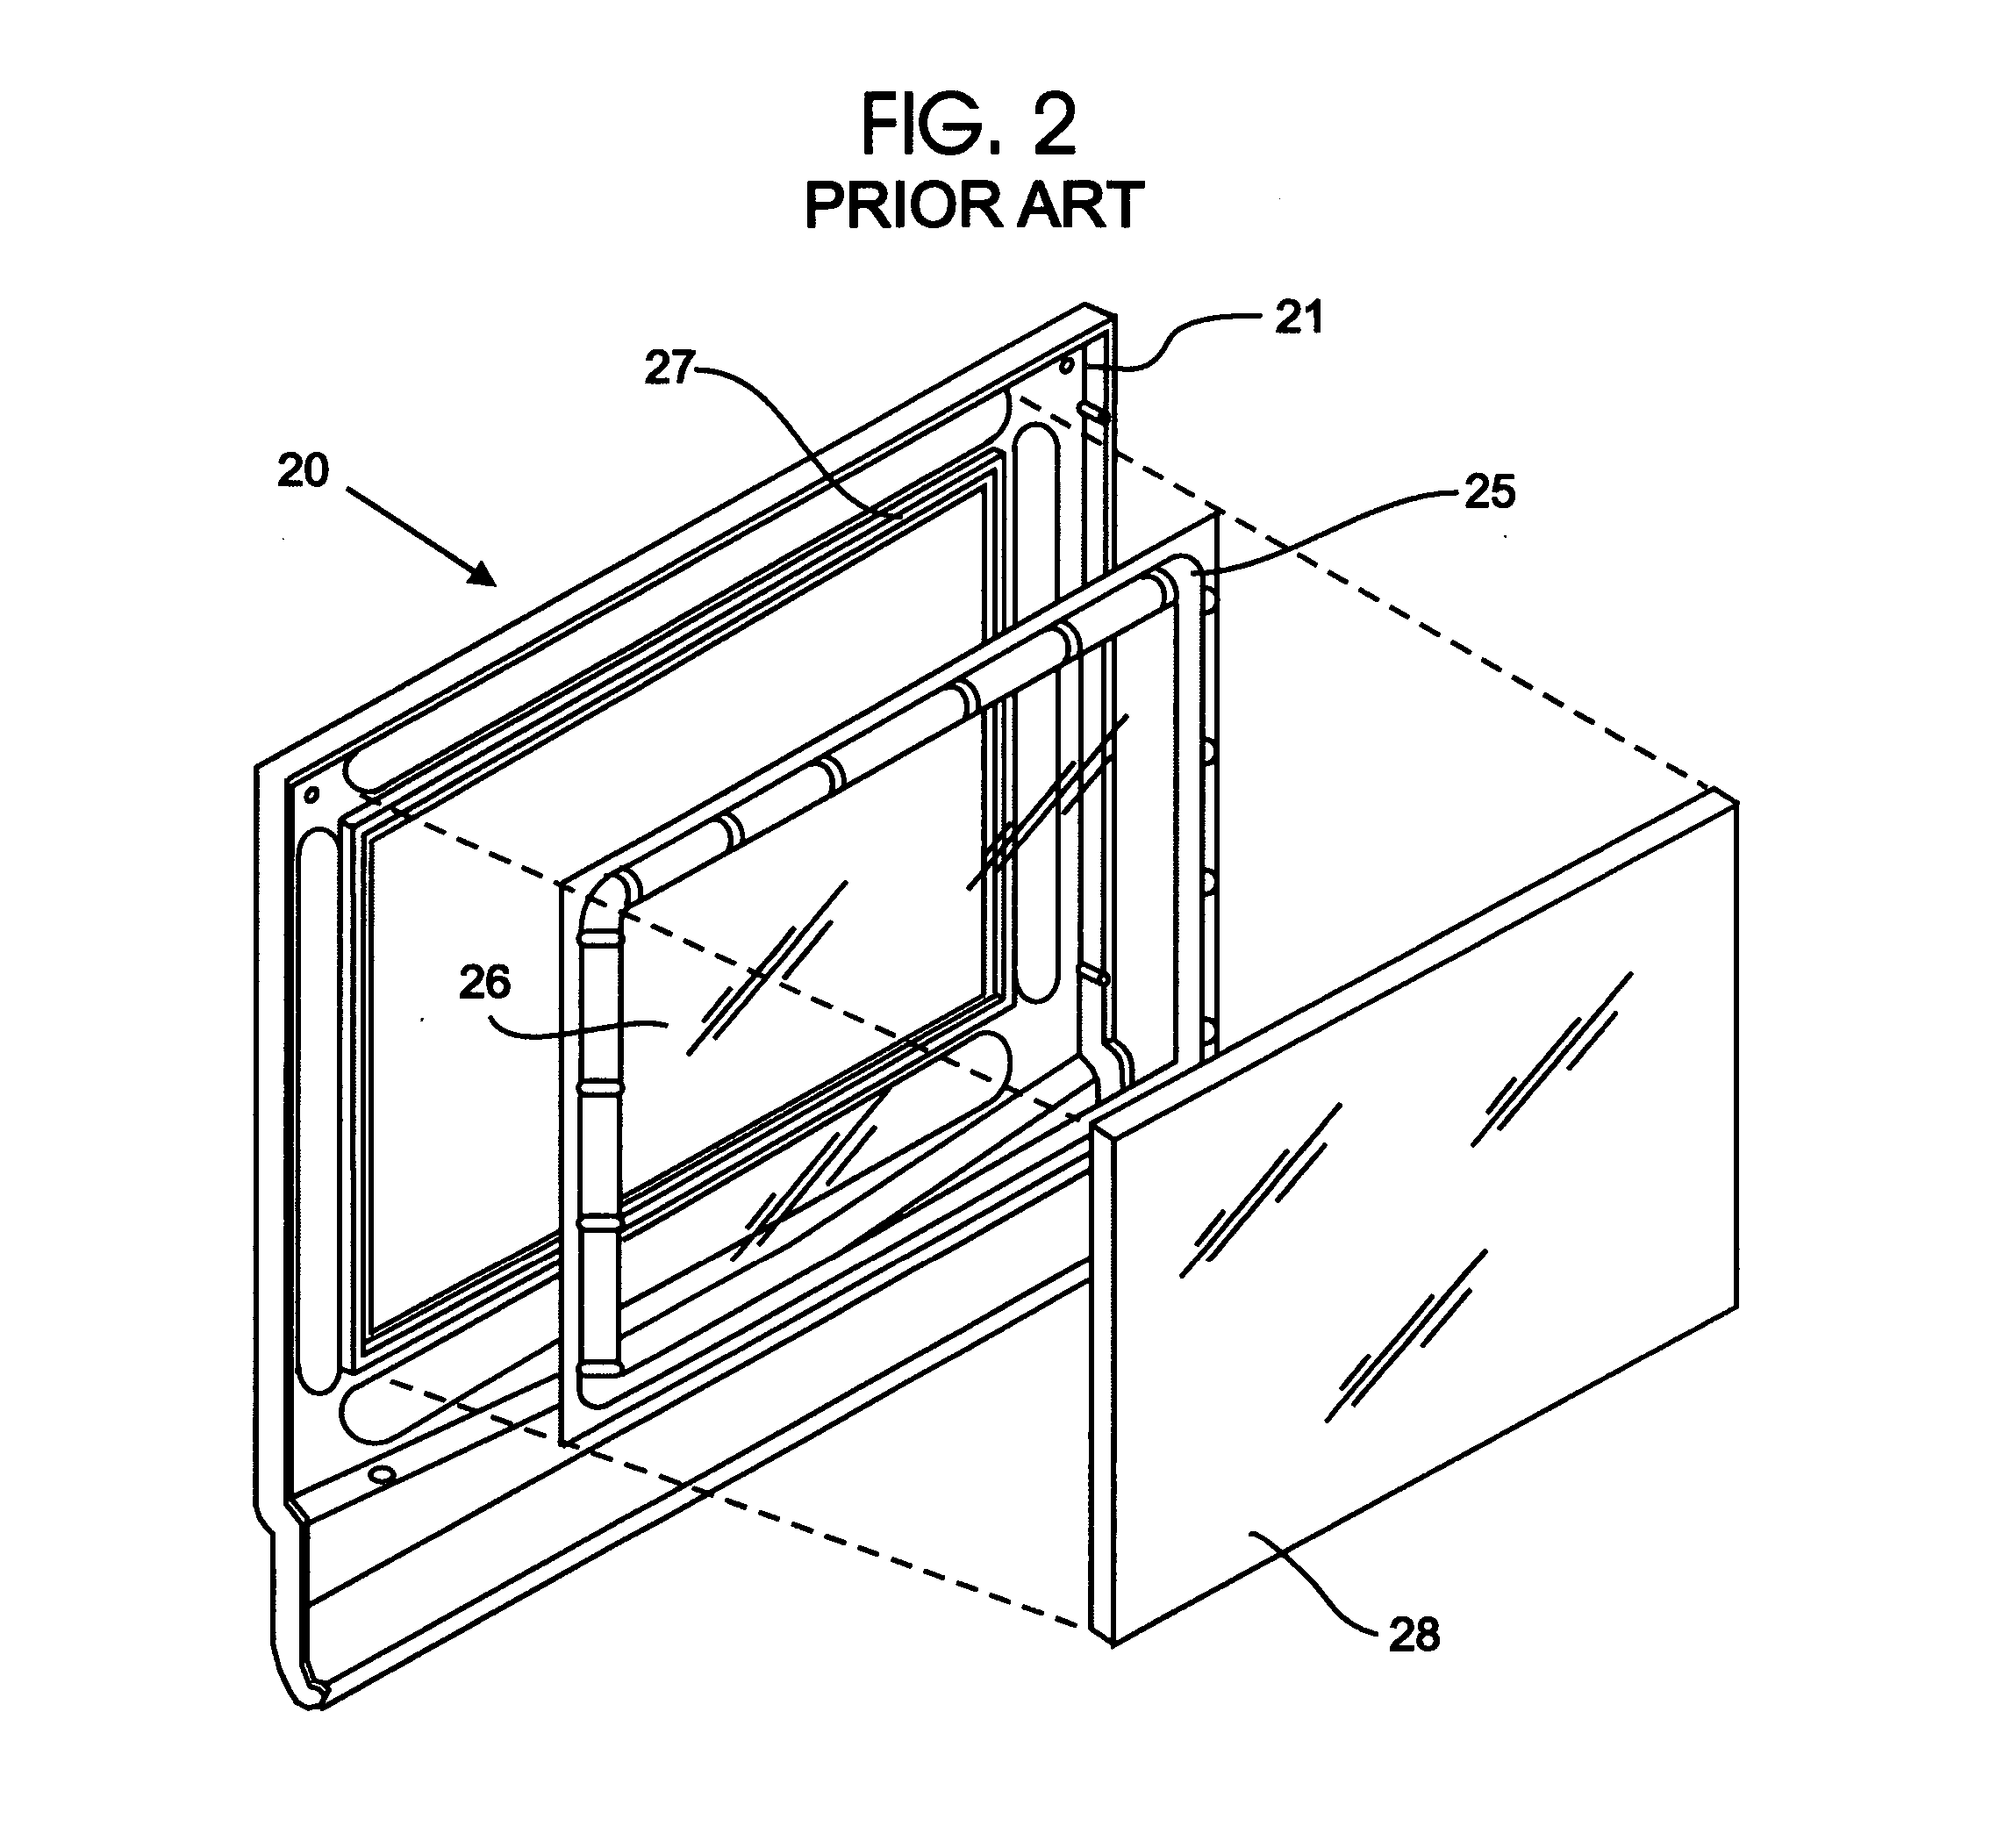 Assembly and device for a display having a perimeter touch guard seal